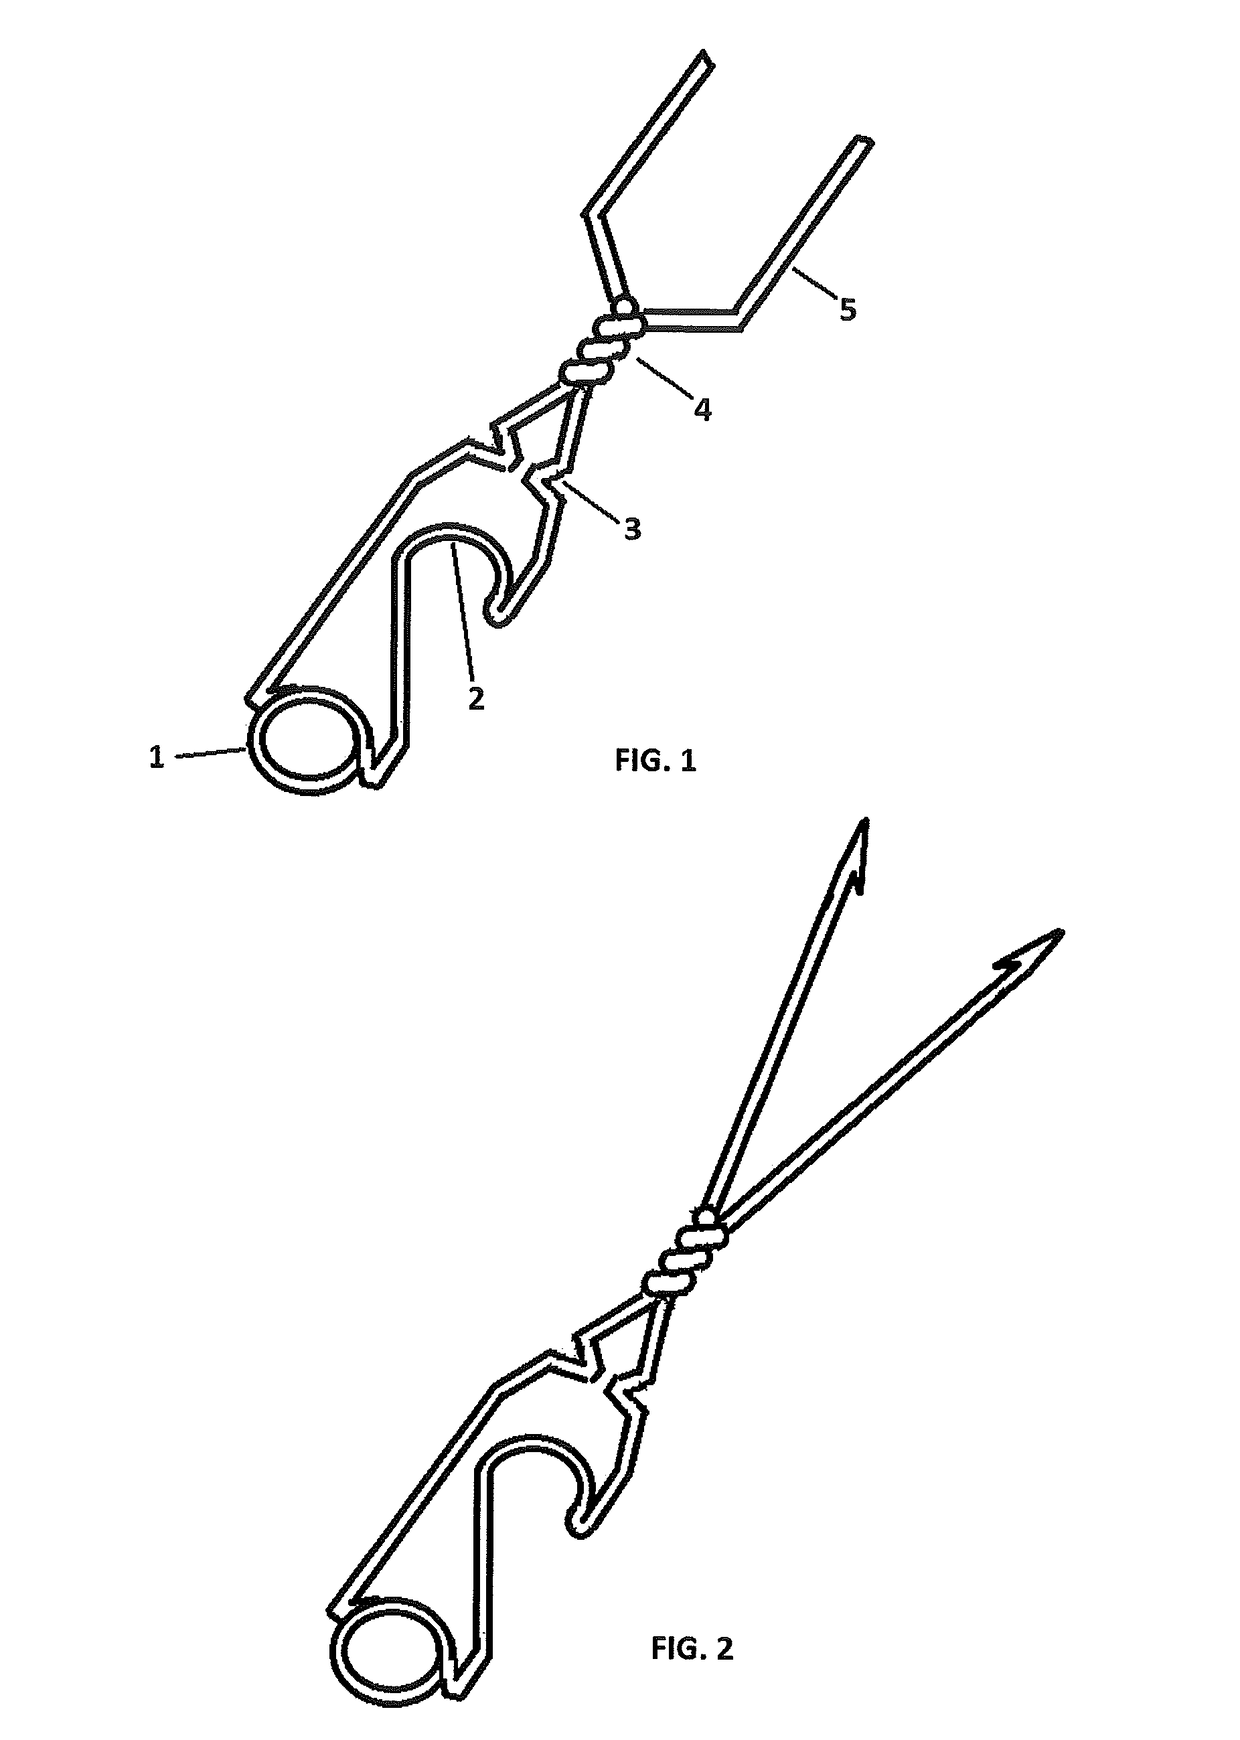 Device and method for removable utensil that attaches to handle of variable sizes